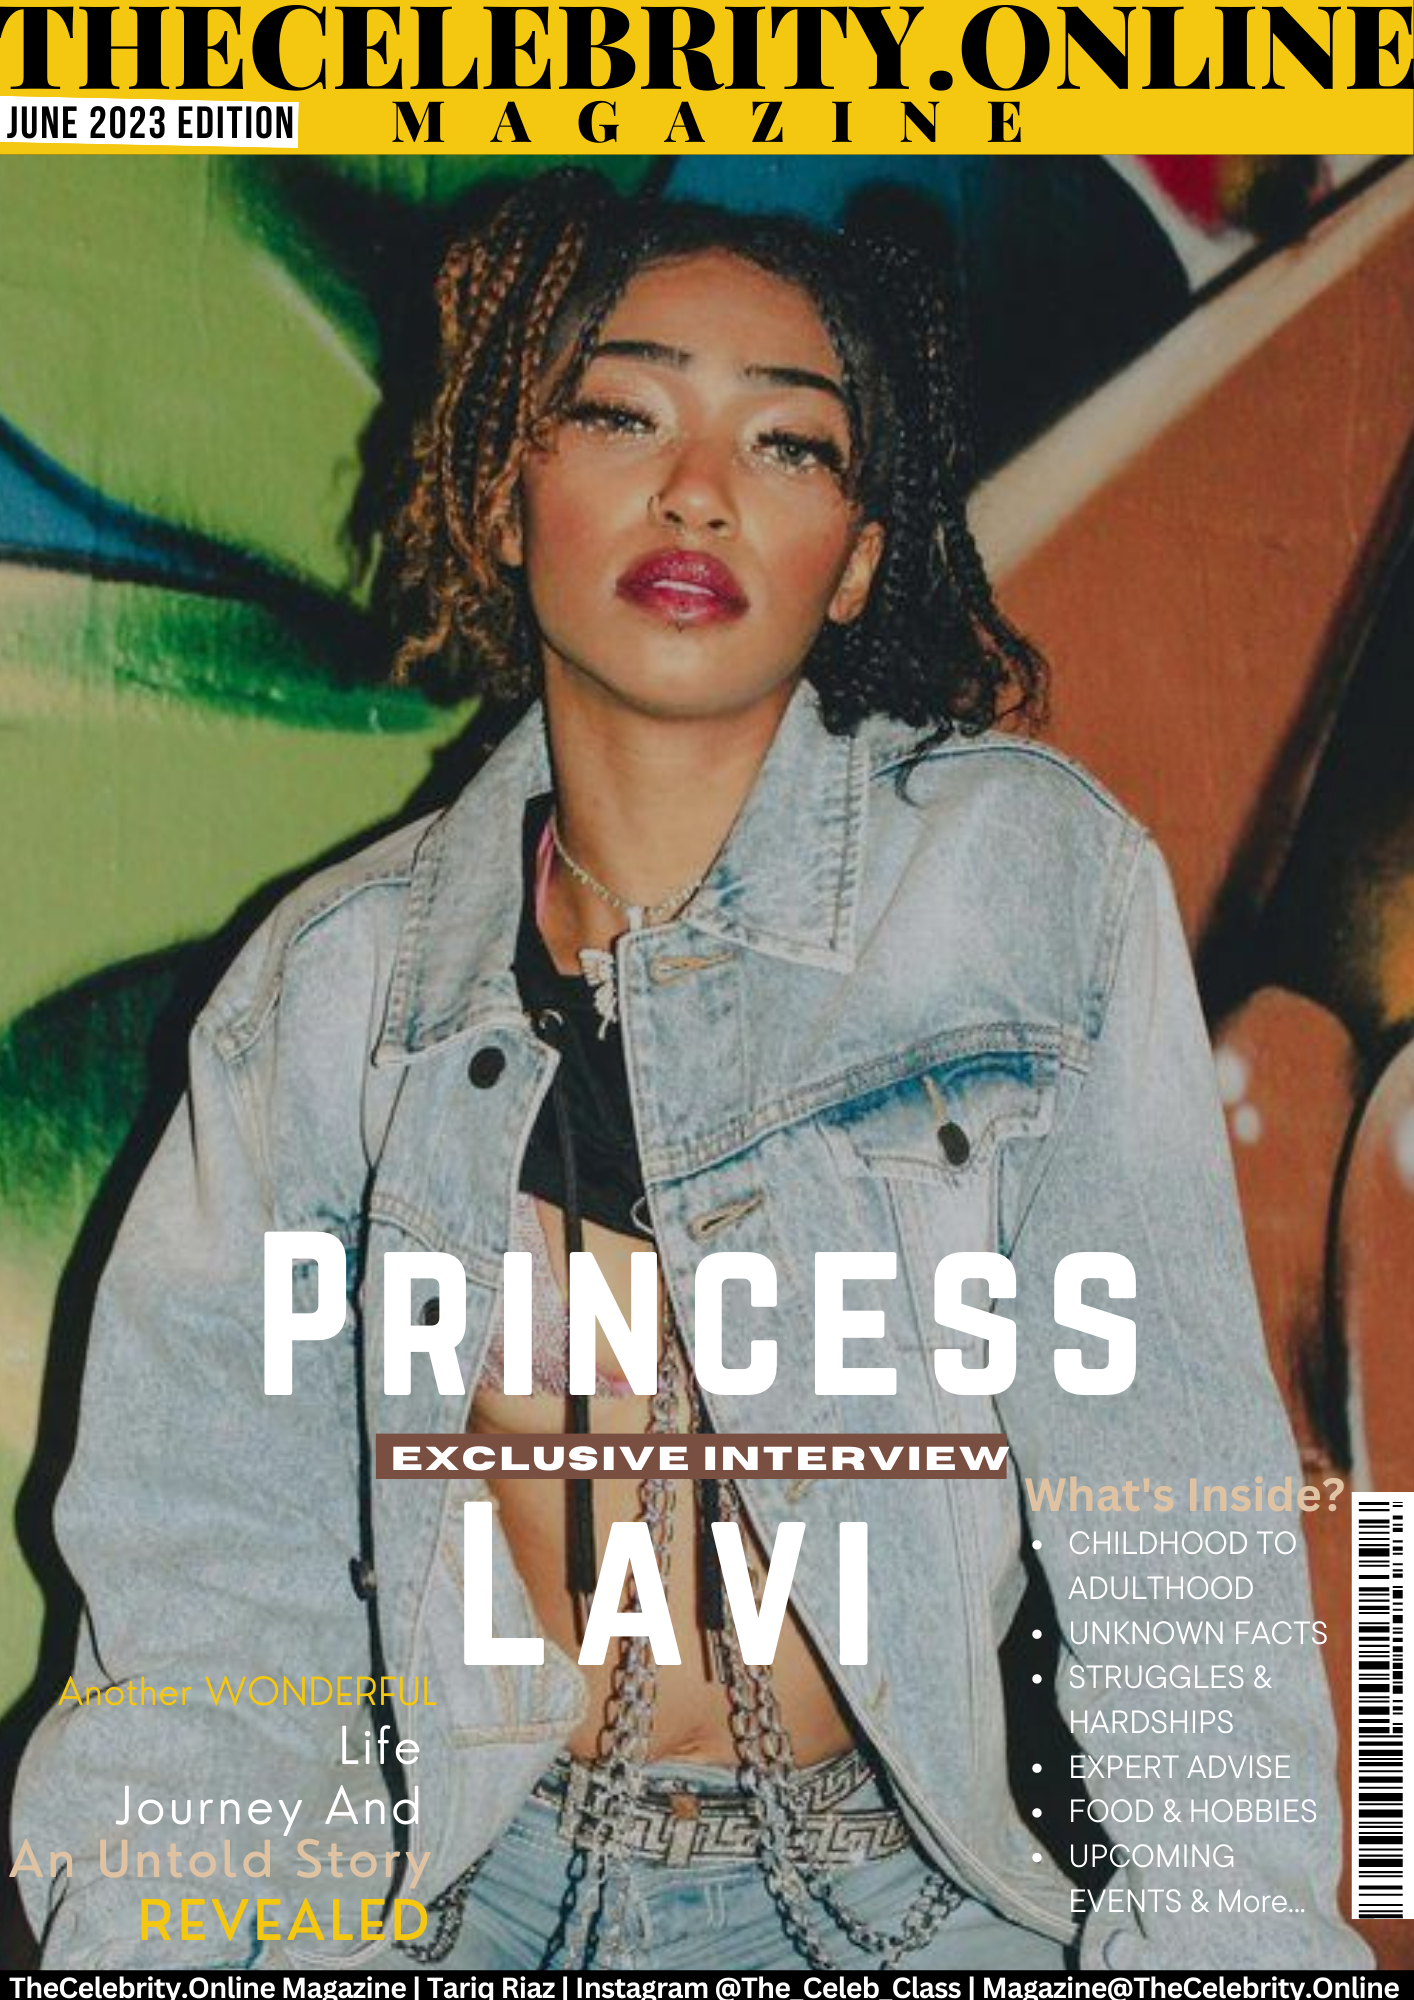 Princess Lavi Exclusive Interview – ‘Be True To Yourself, It Is The Most Important Thing’